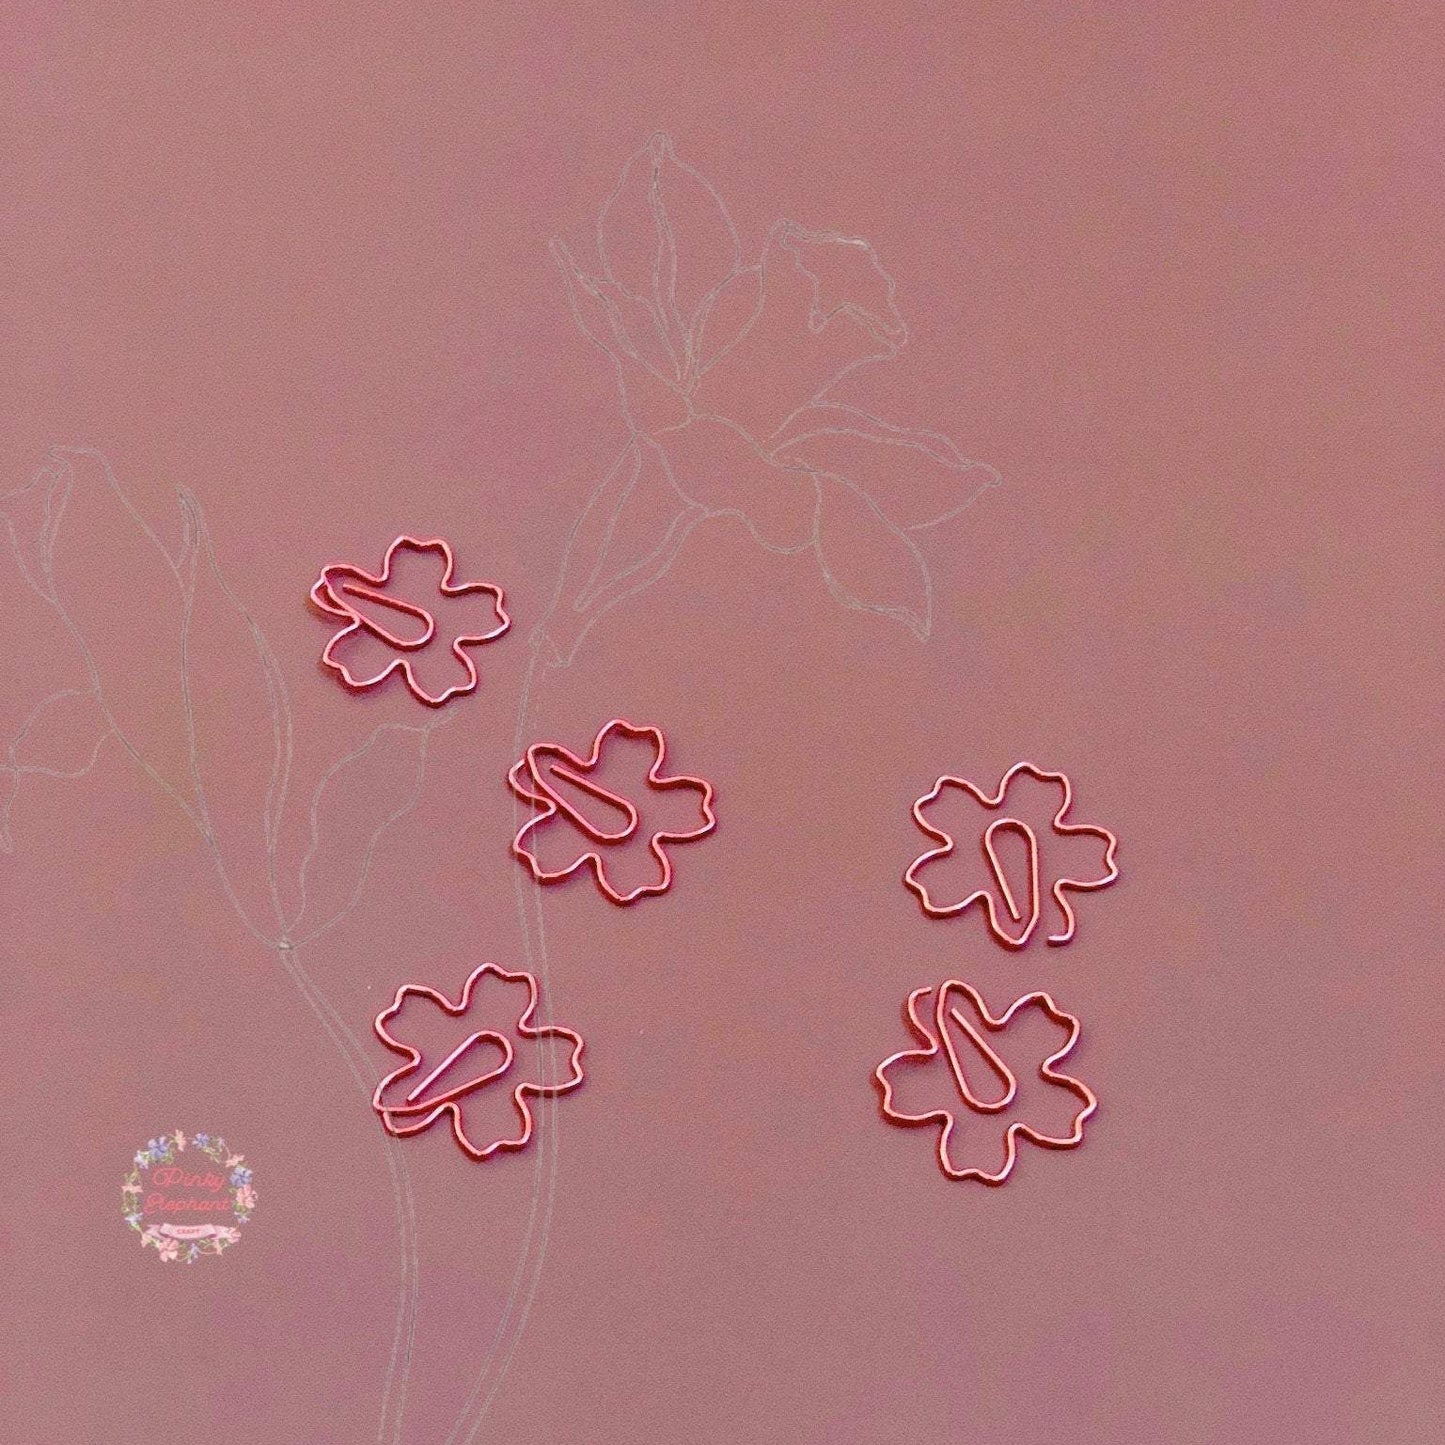 Five pink sakura-shaped paper clips on a light marron background, with a sketch of two roses in the background.